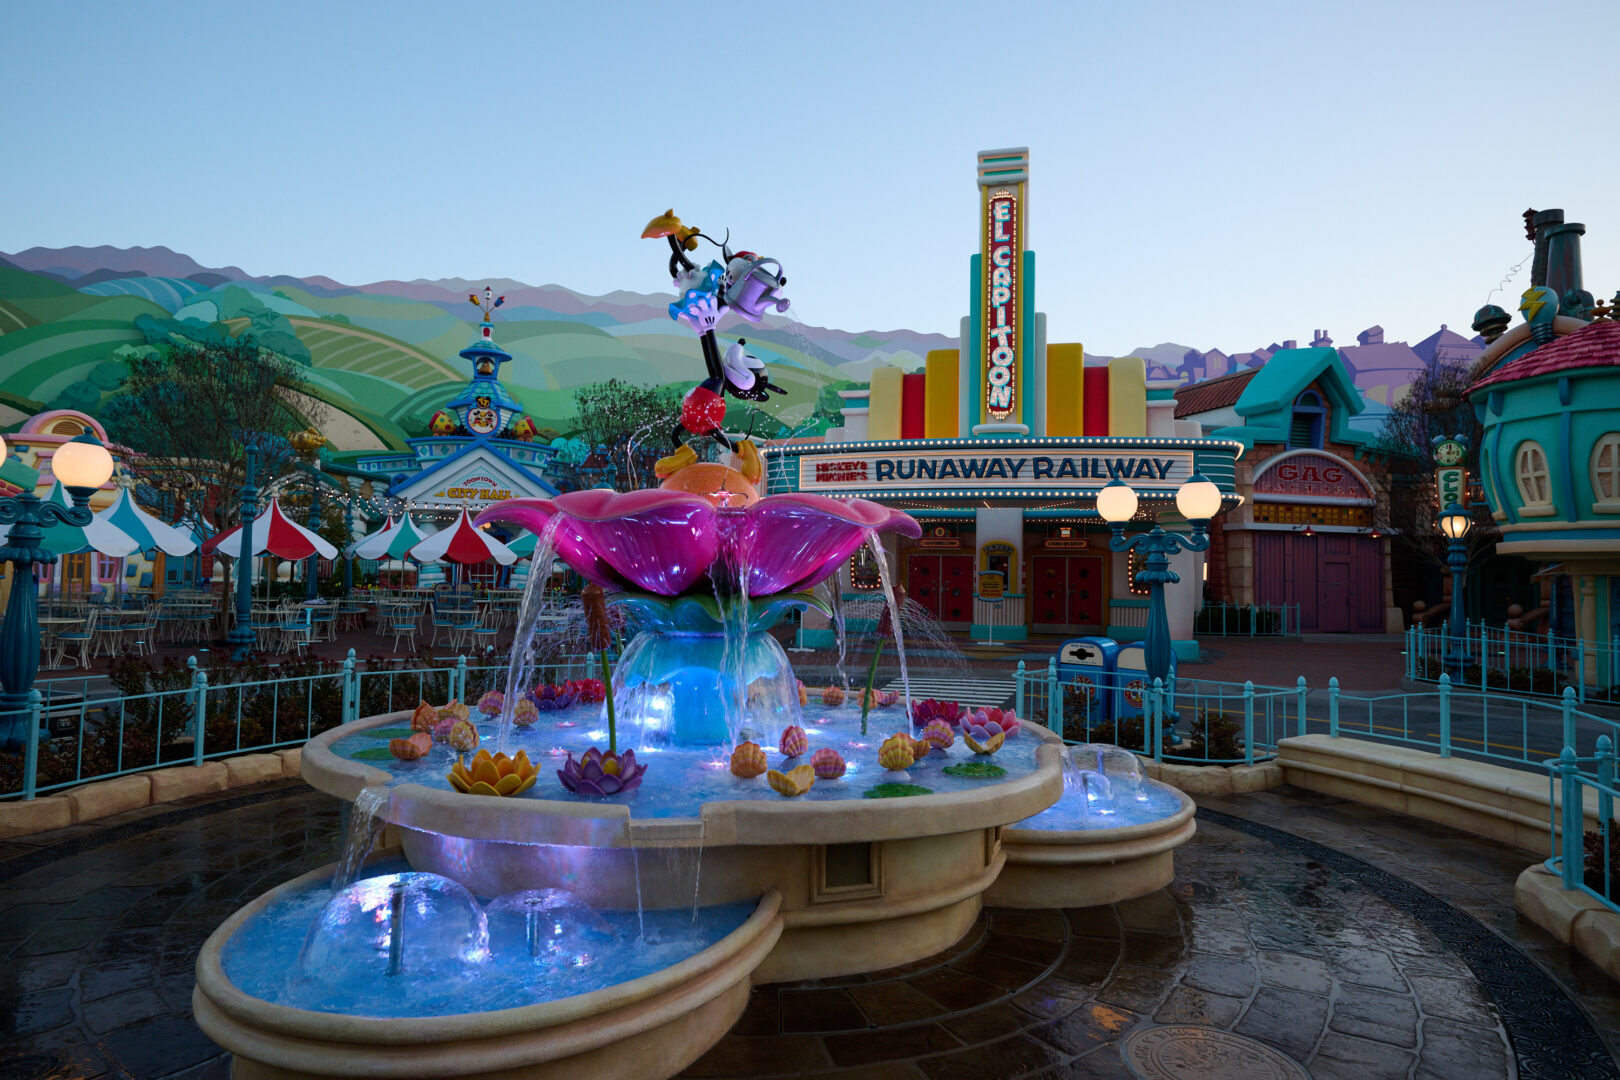 Closer Look at the Newly Opened Mickey’s Toontown in Disneyland